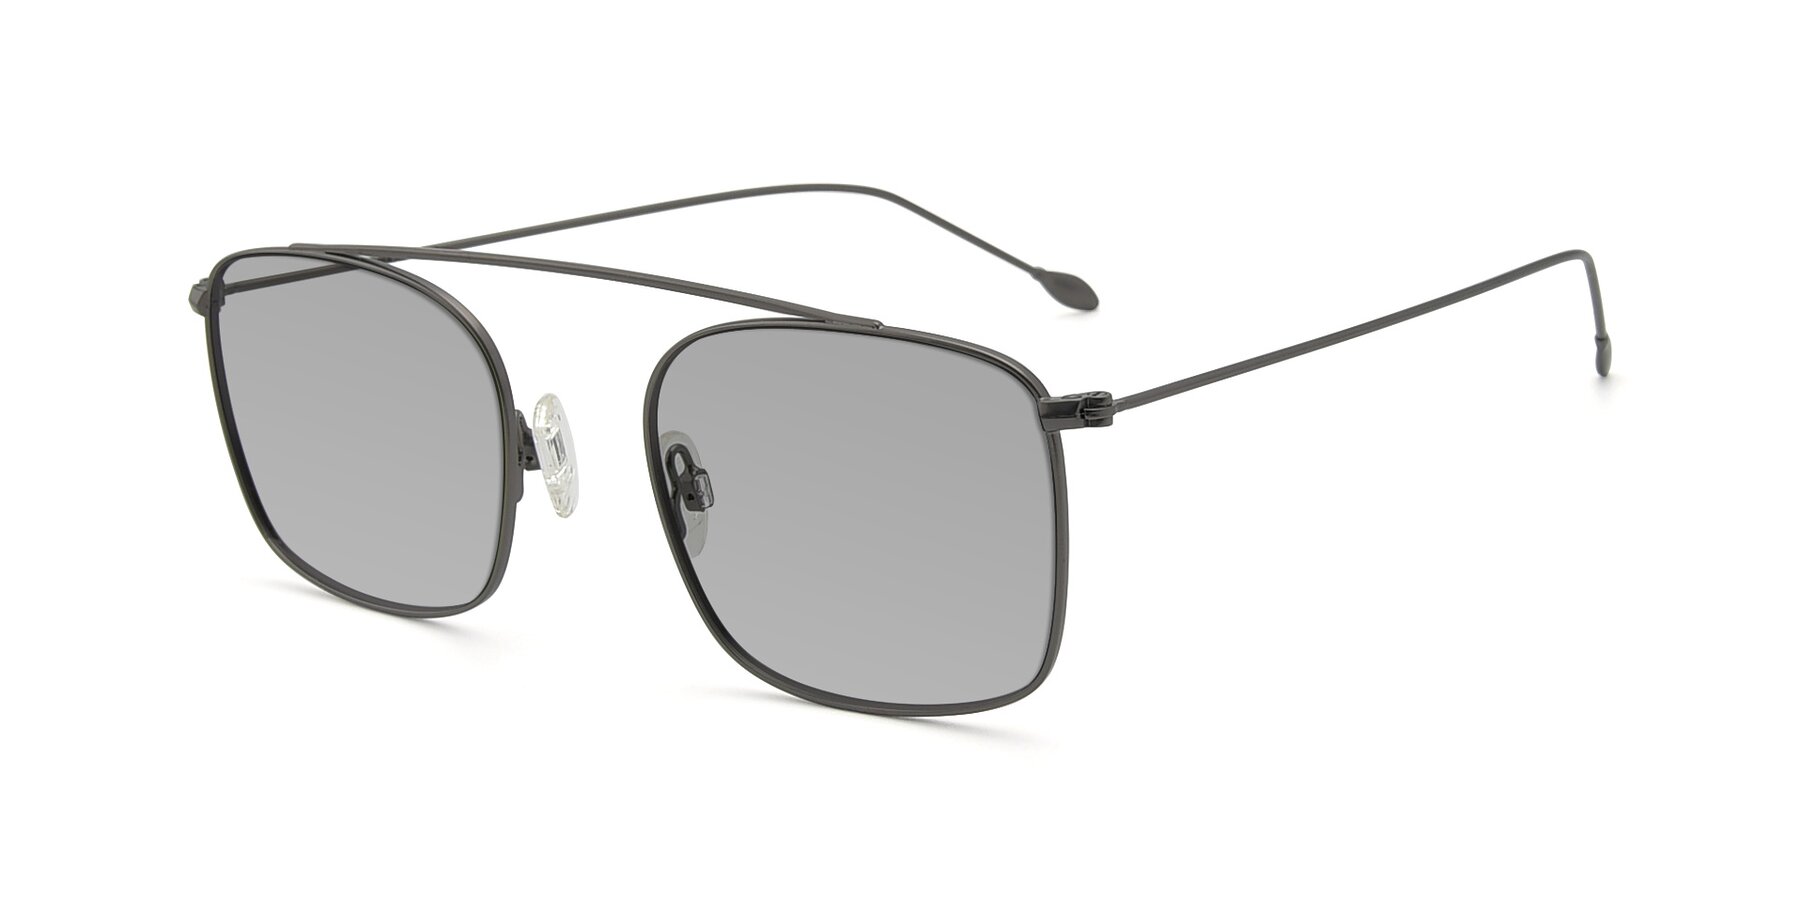 Angle of The Librarian in Gunmetal with Light Gray Tinted Lenses